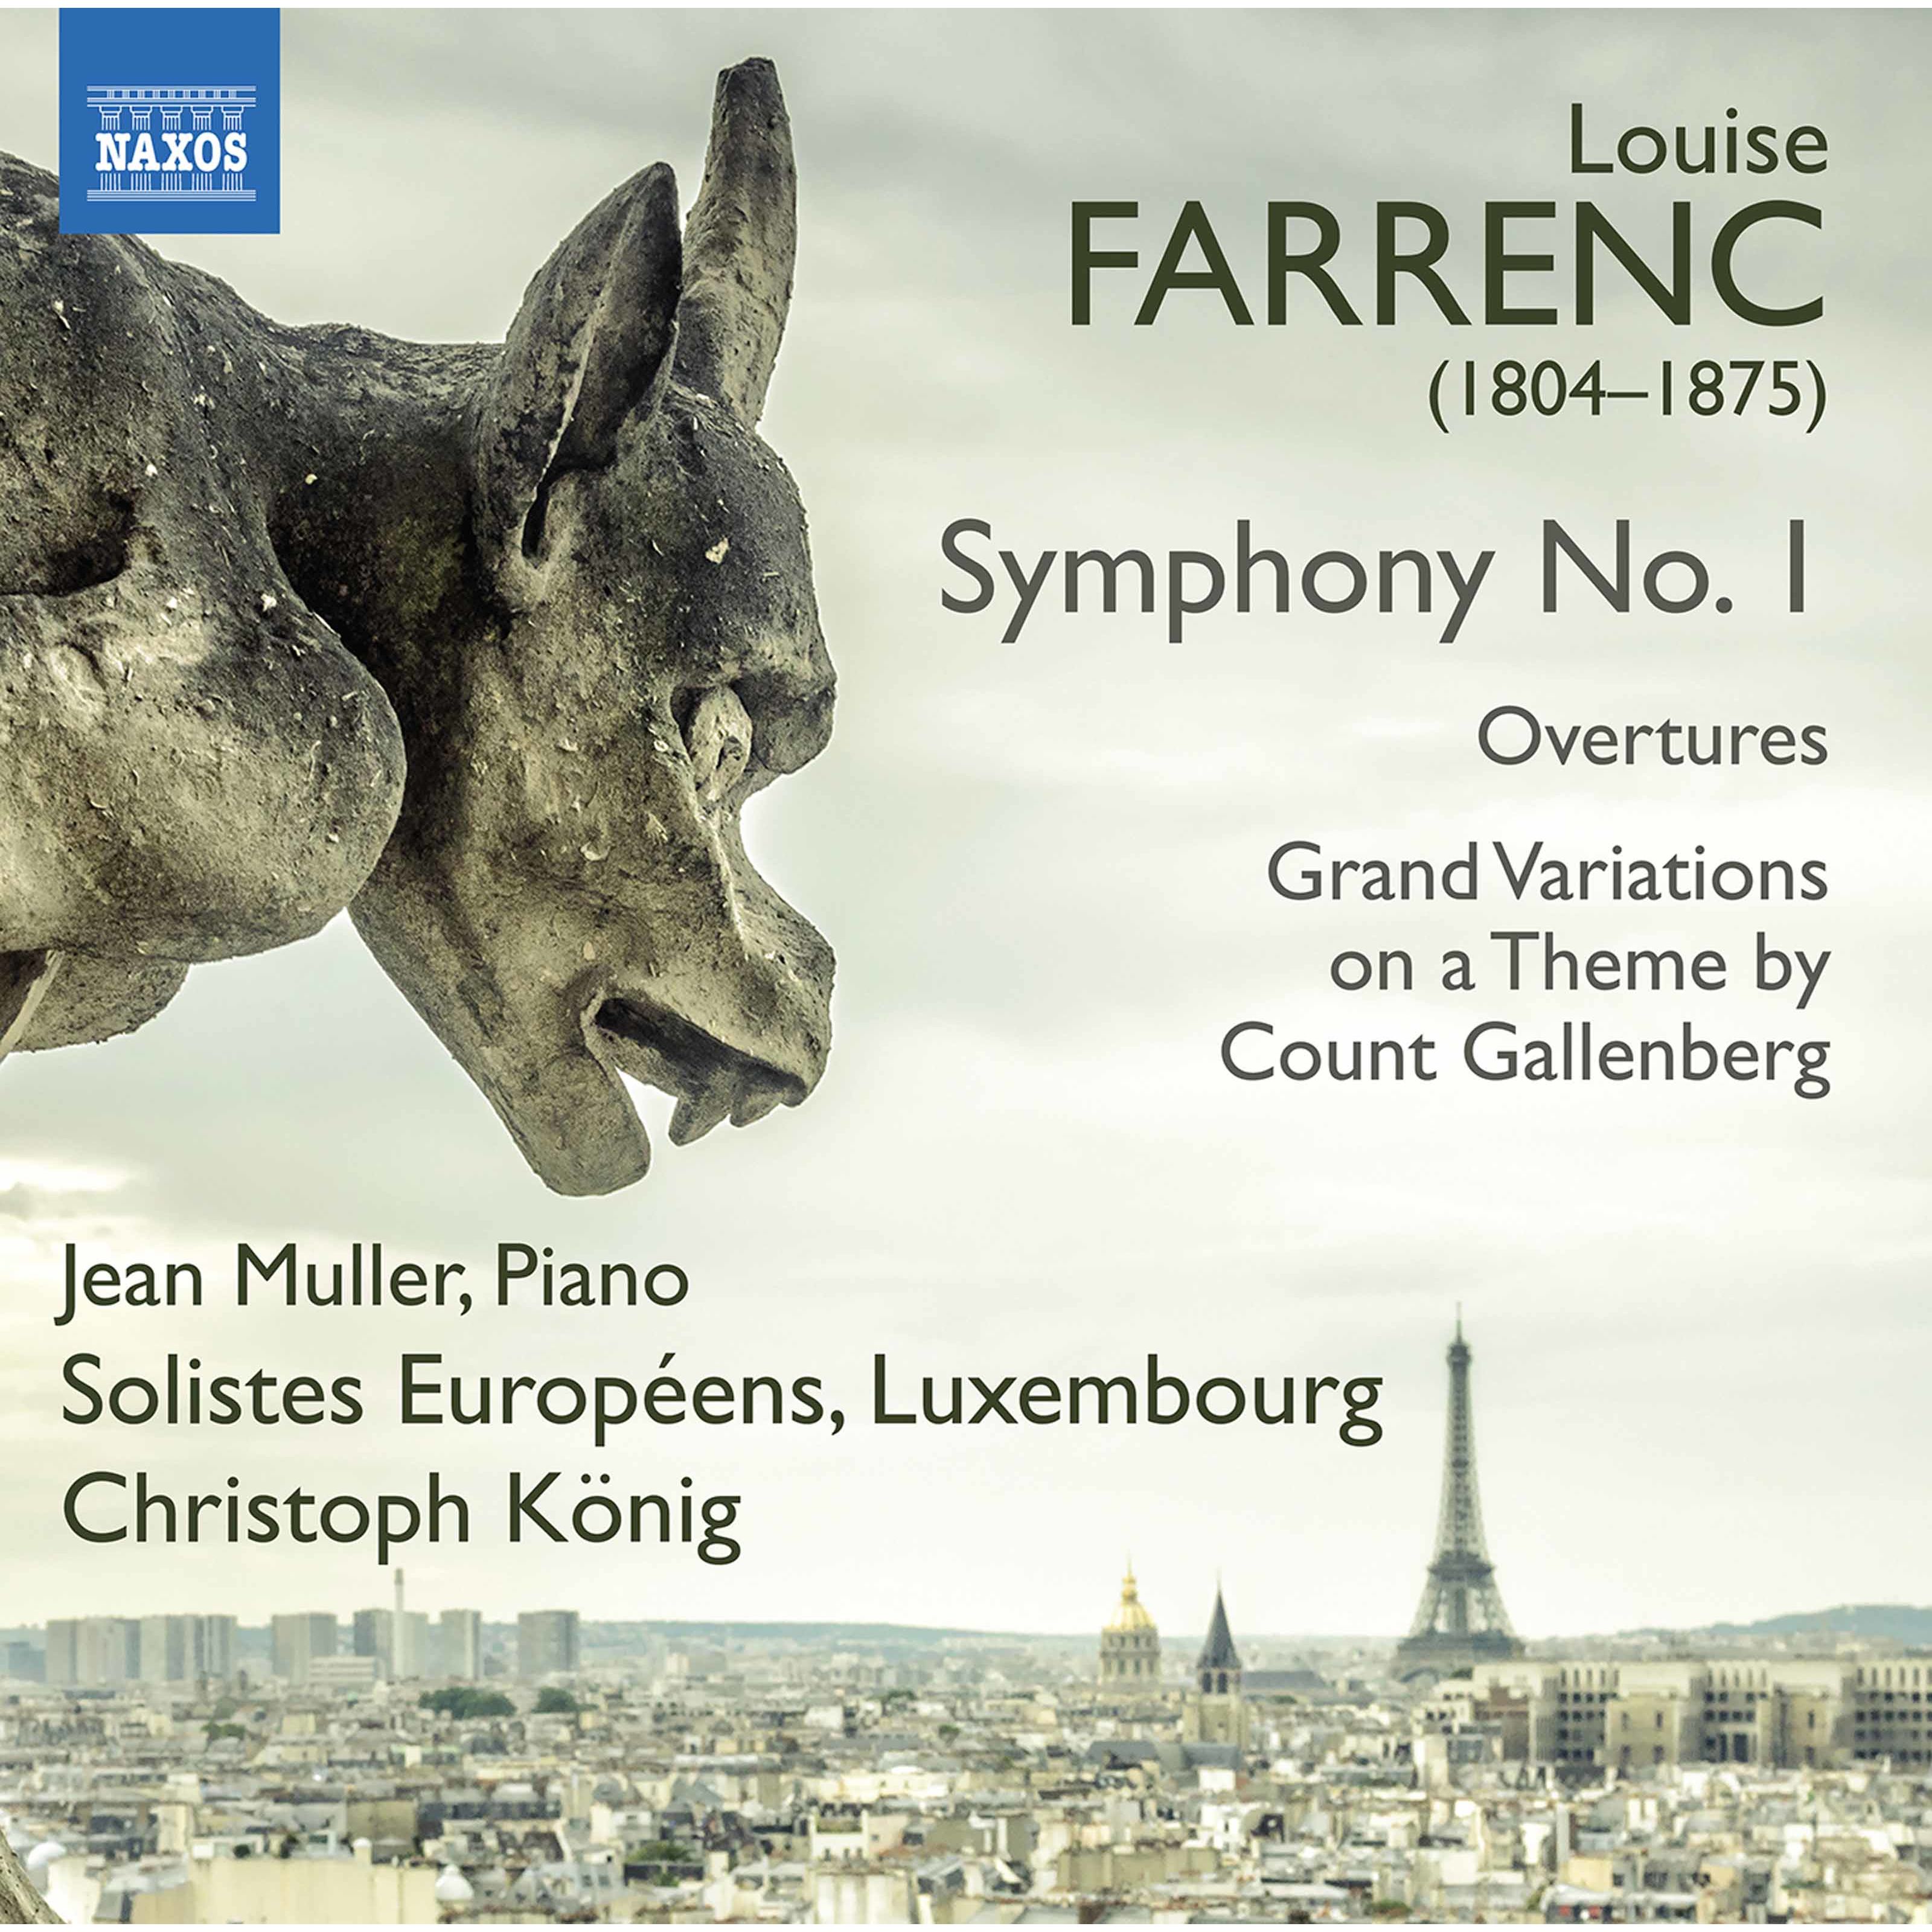 Jean Muller, Solistes Europeens, Luxembourg & Christoph König – Farrenc: Orchestral Works (2020) [FLAC 24bit/96kHz]